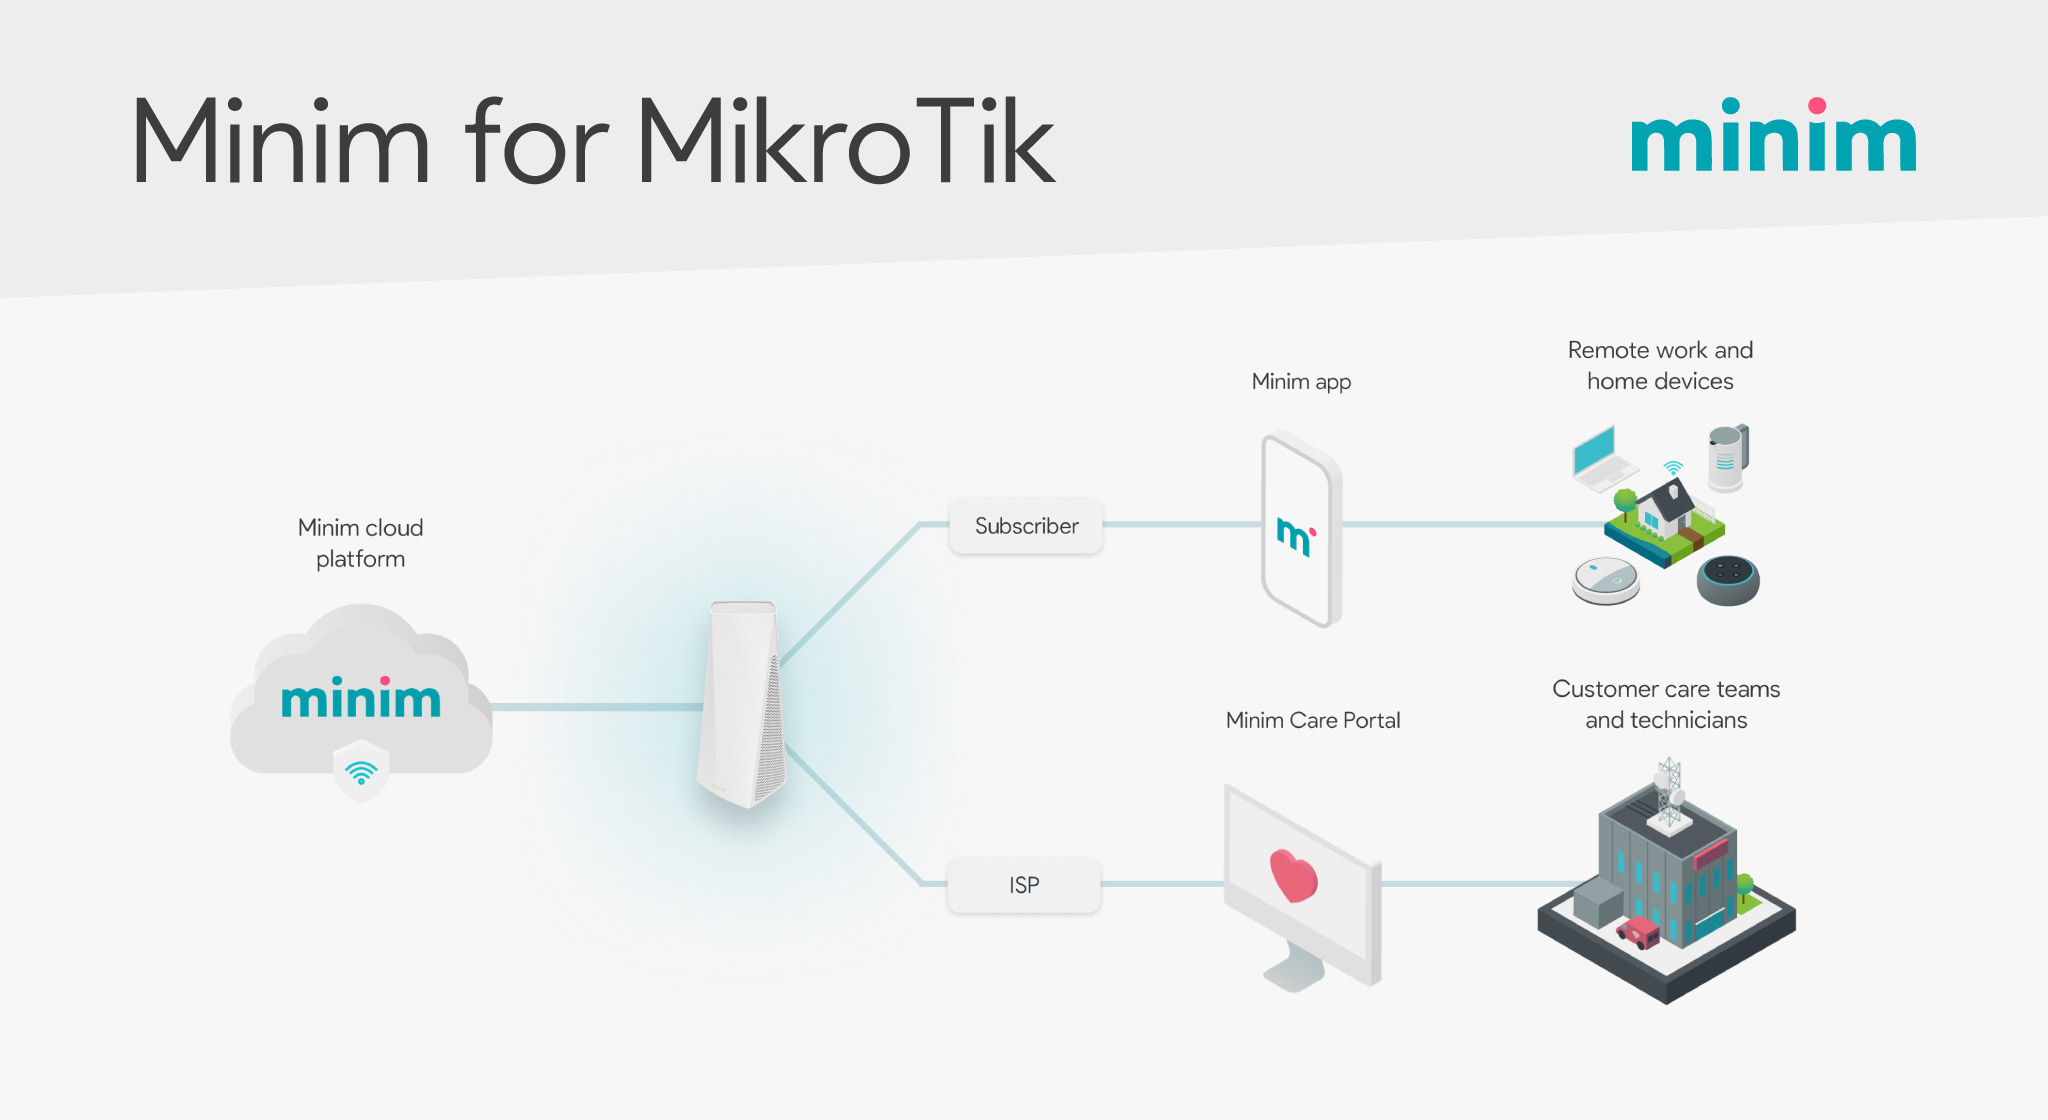 <img src="minim-all-things-mikrotik.jpg" alt="MikroTik-cloud-management-complete-comtrol-over-your-hardware-fleet-with-a-centralized-dashboard">